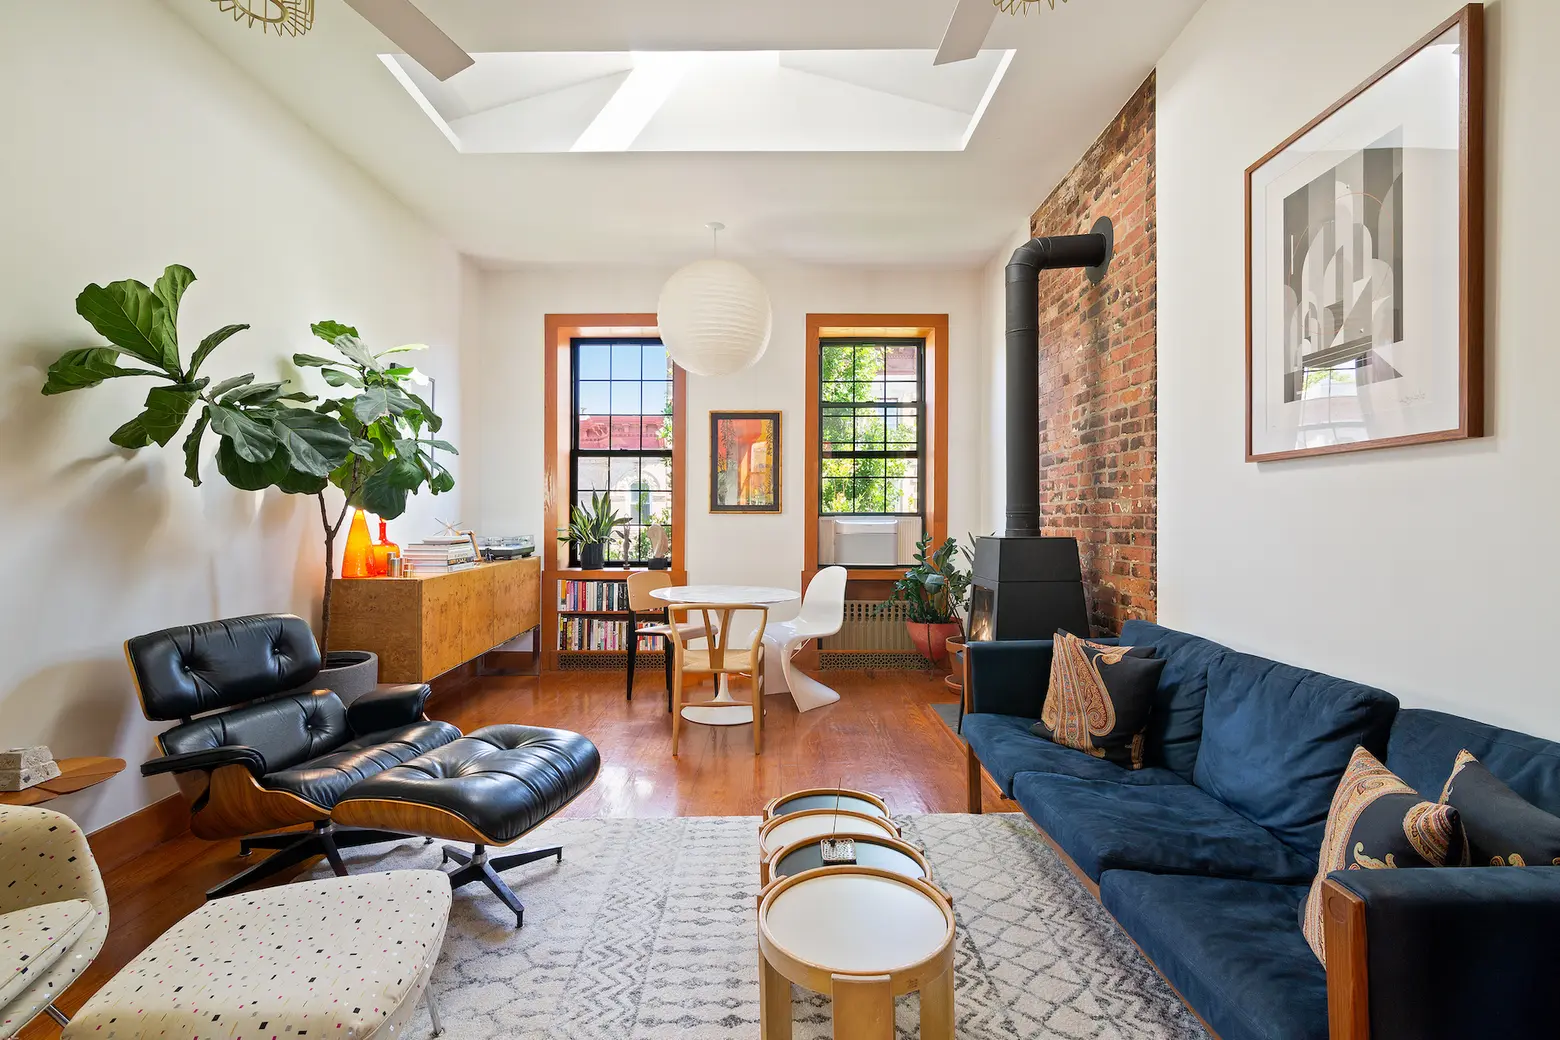 Lovely two-bedroom condo in Bed-Stuy is asking just $925K with no monthly  taxes